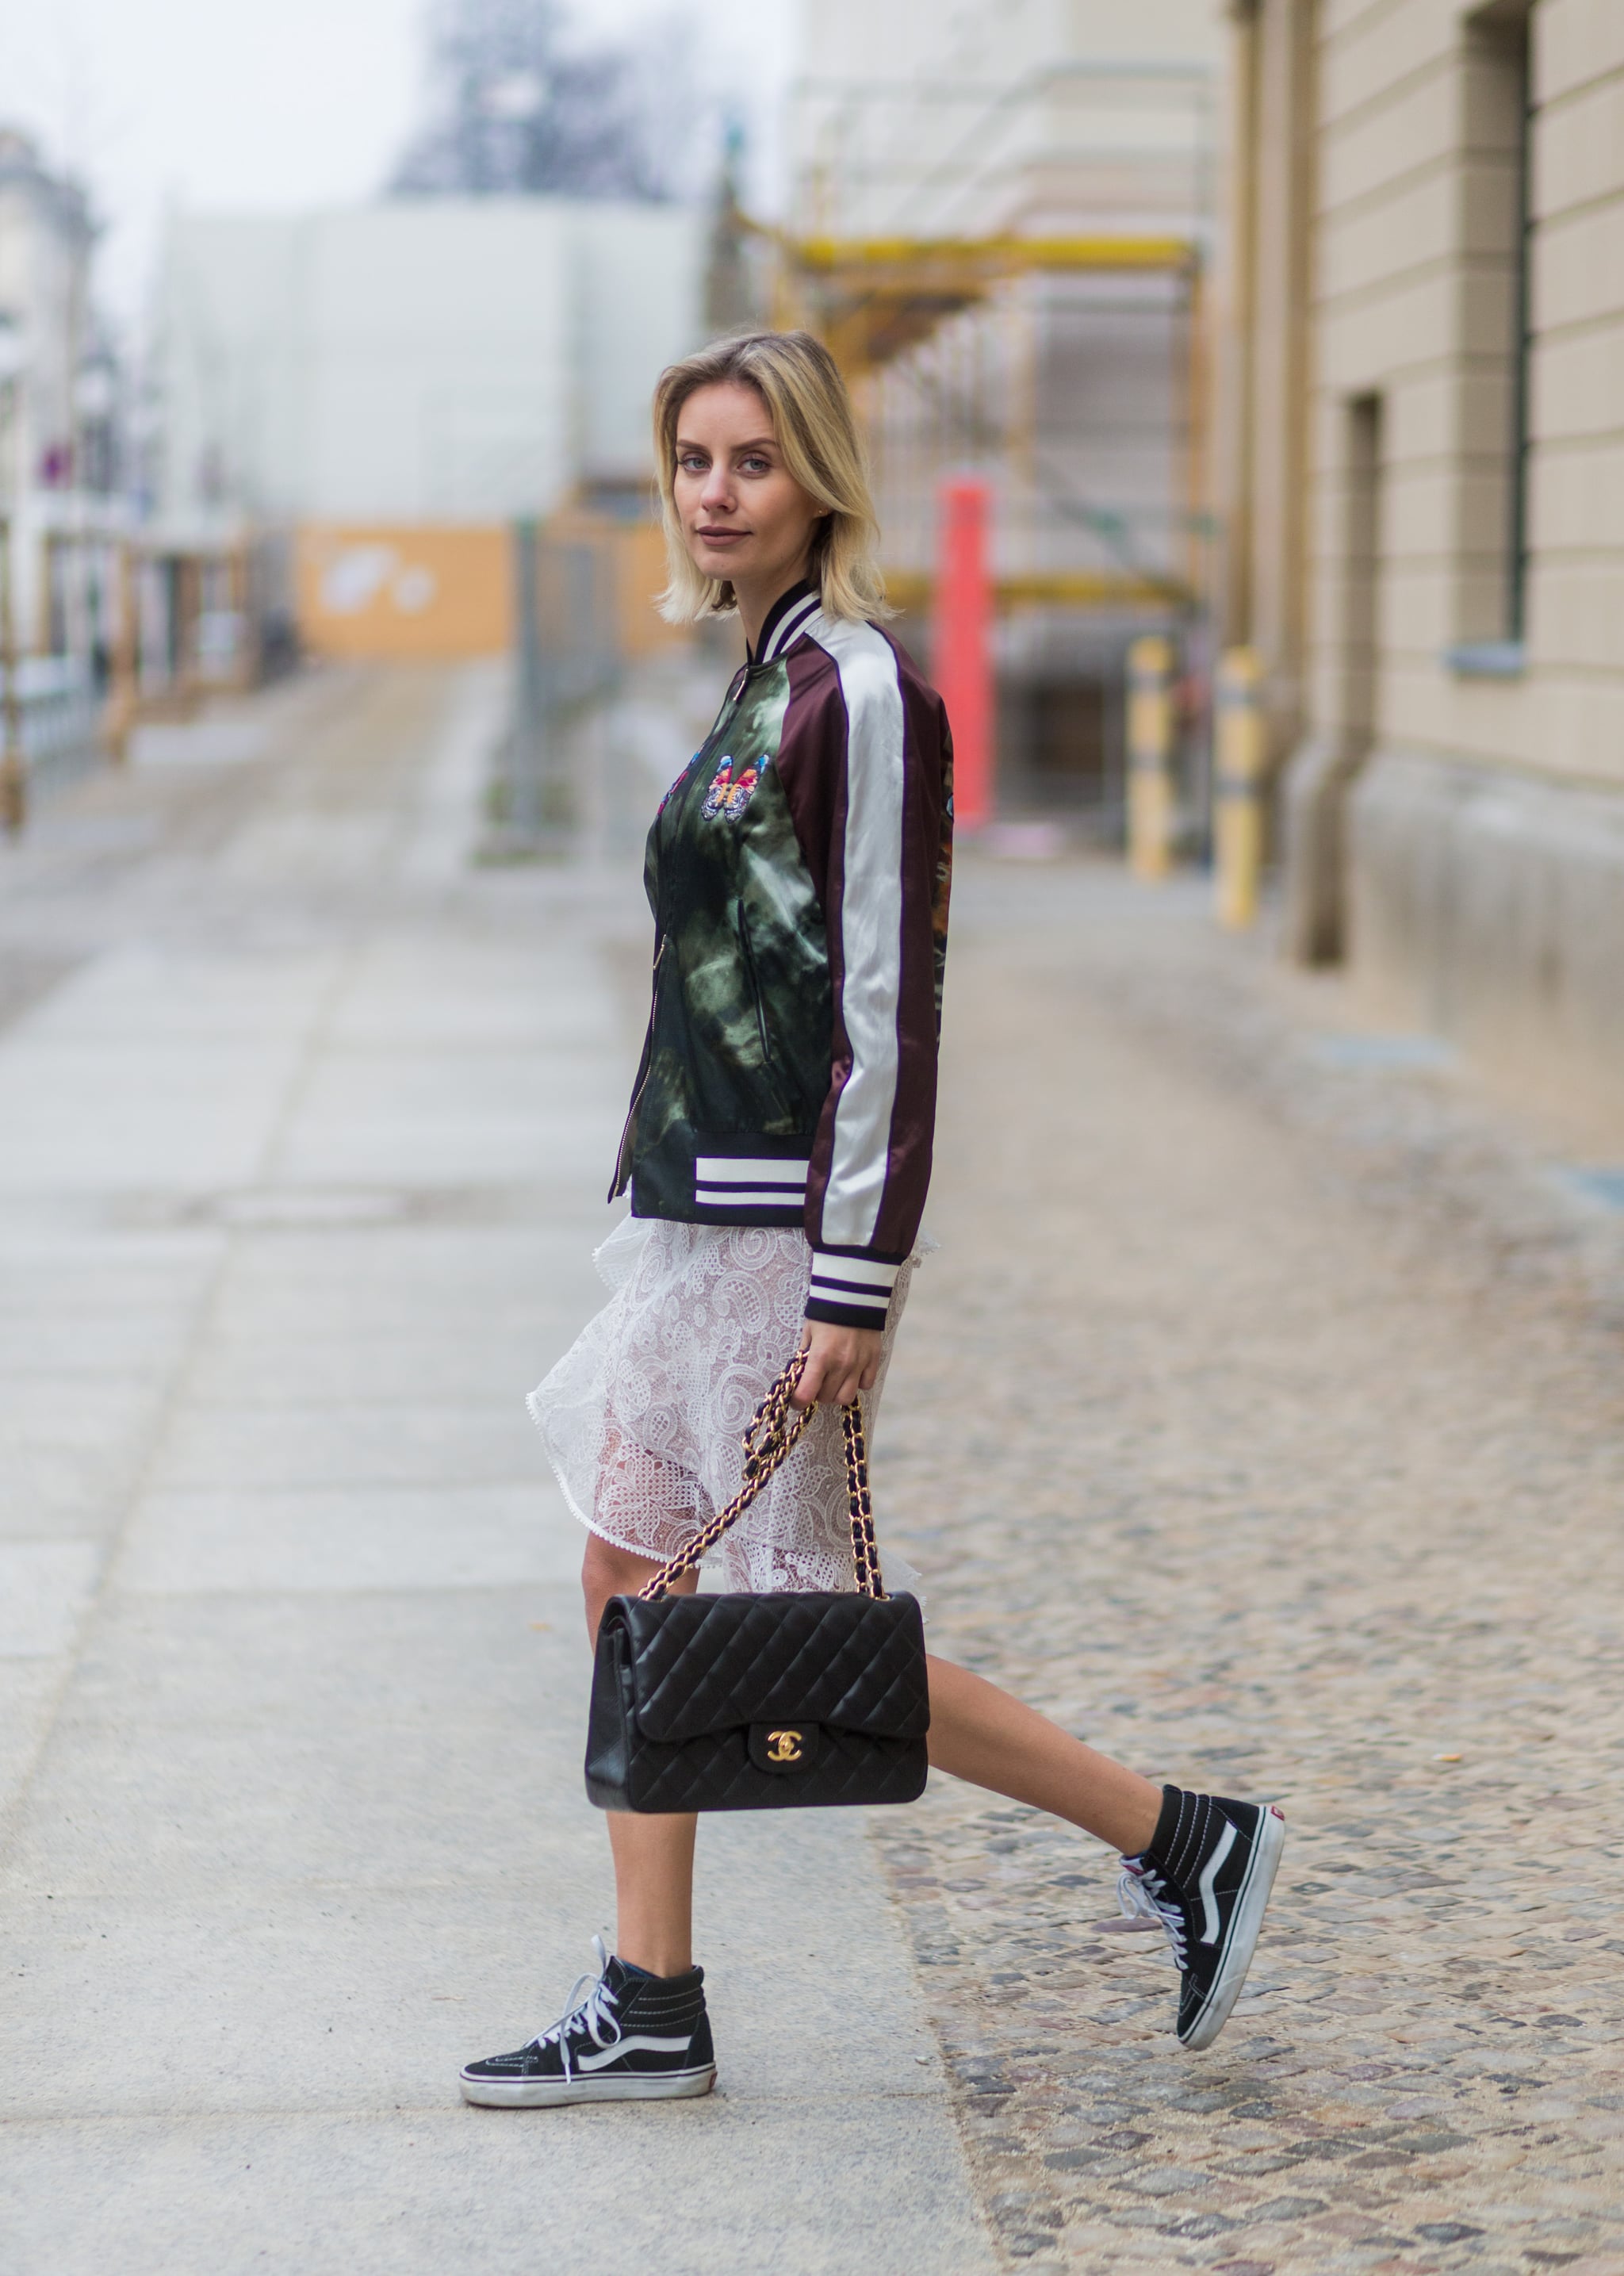 The Sneakers Work For High-Low Outfits 